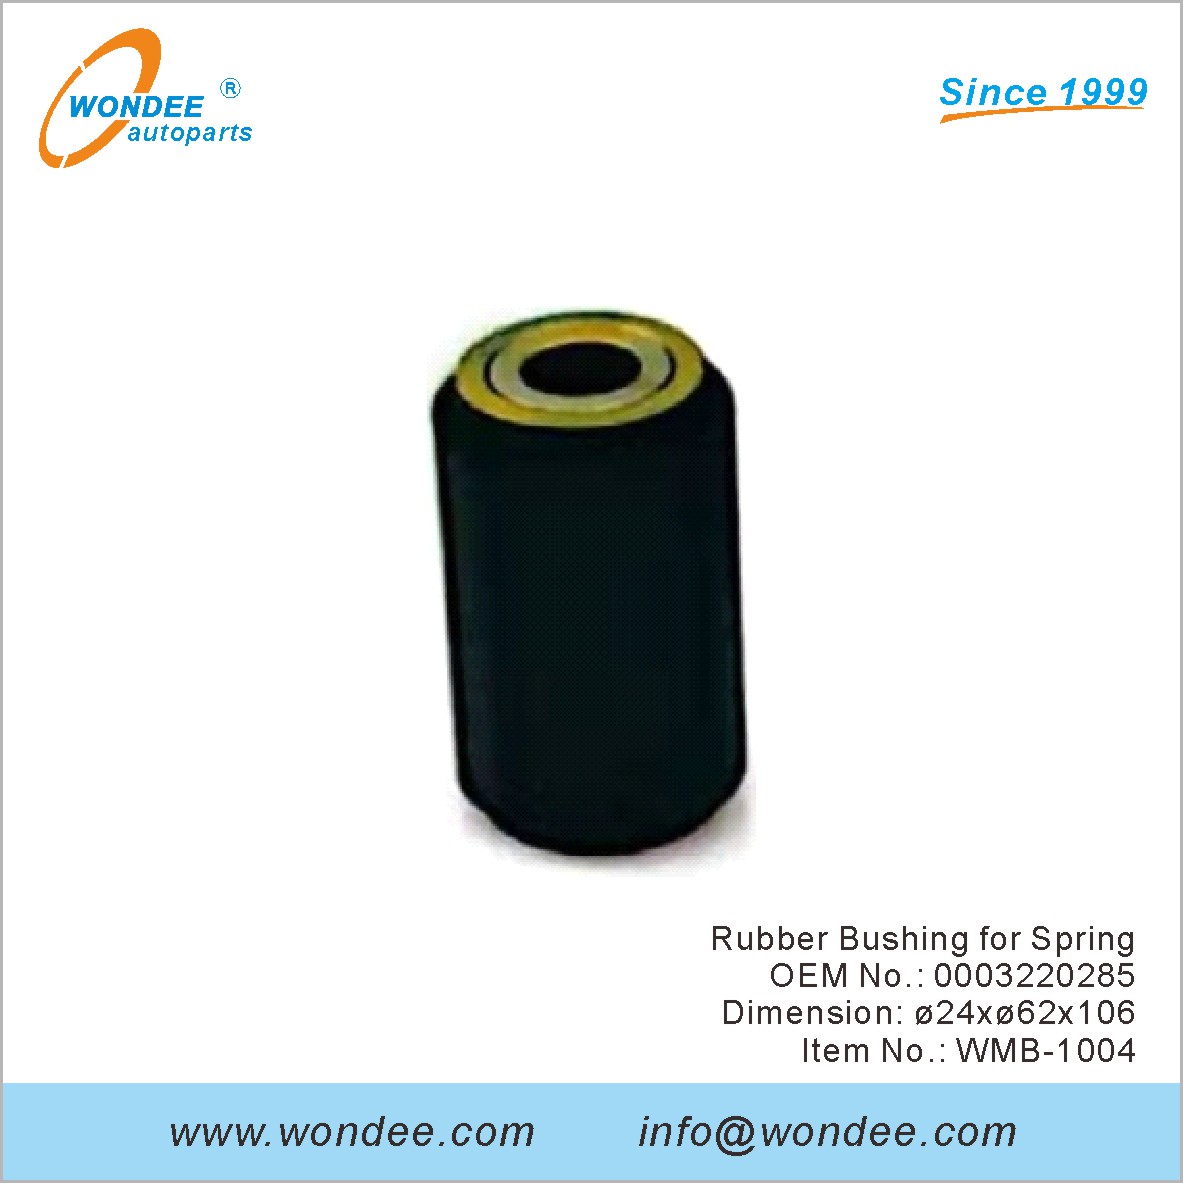 Rubber Bushing for Spring OEM 0003220285 for Benz from WONDEE